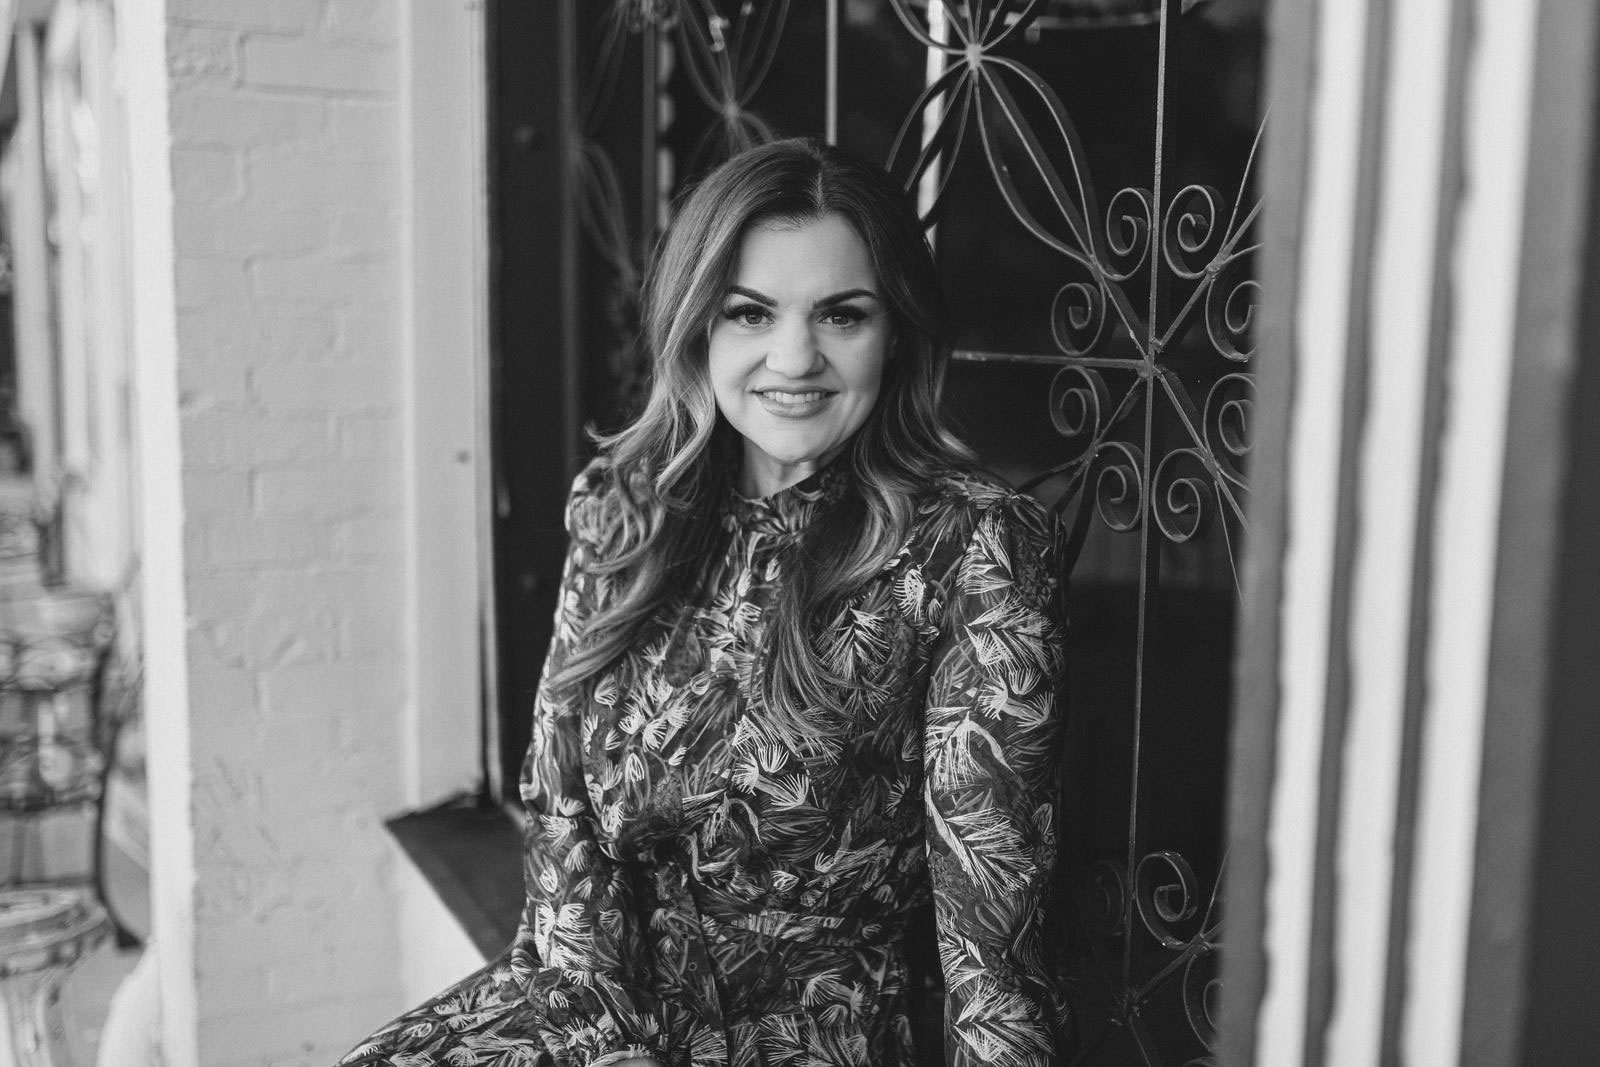 SLHour: Unplanned, A Featured Interview with Abby Johnson